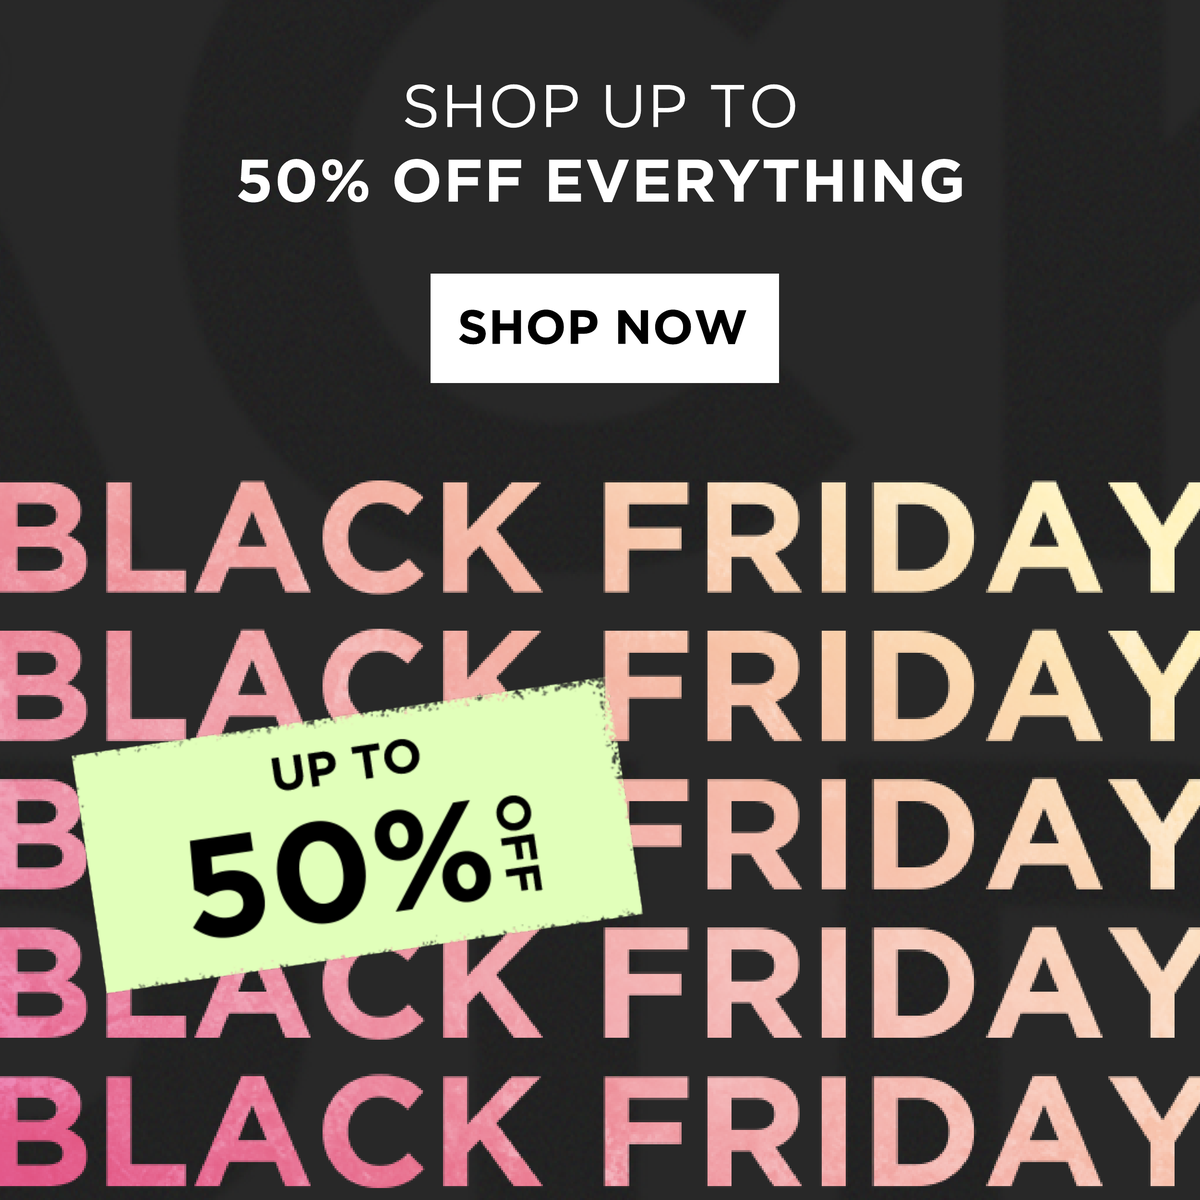 Shop up to 50% off everything in our Black Friday Sale